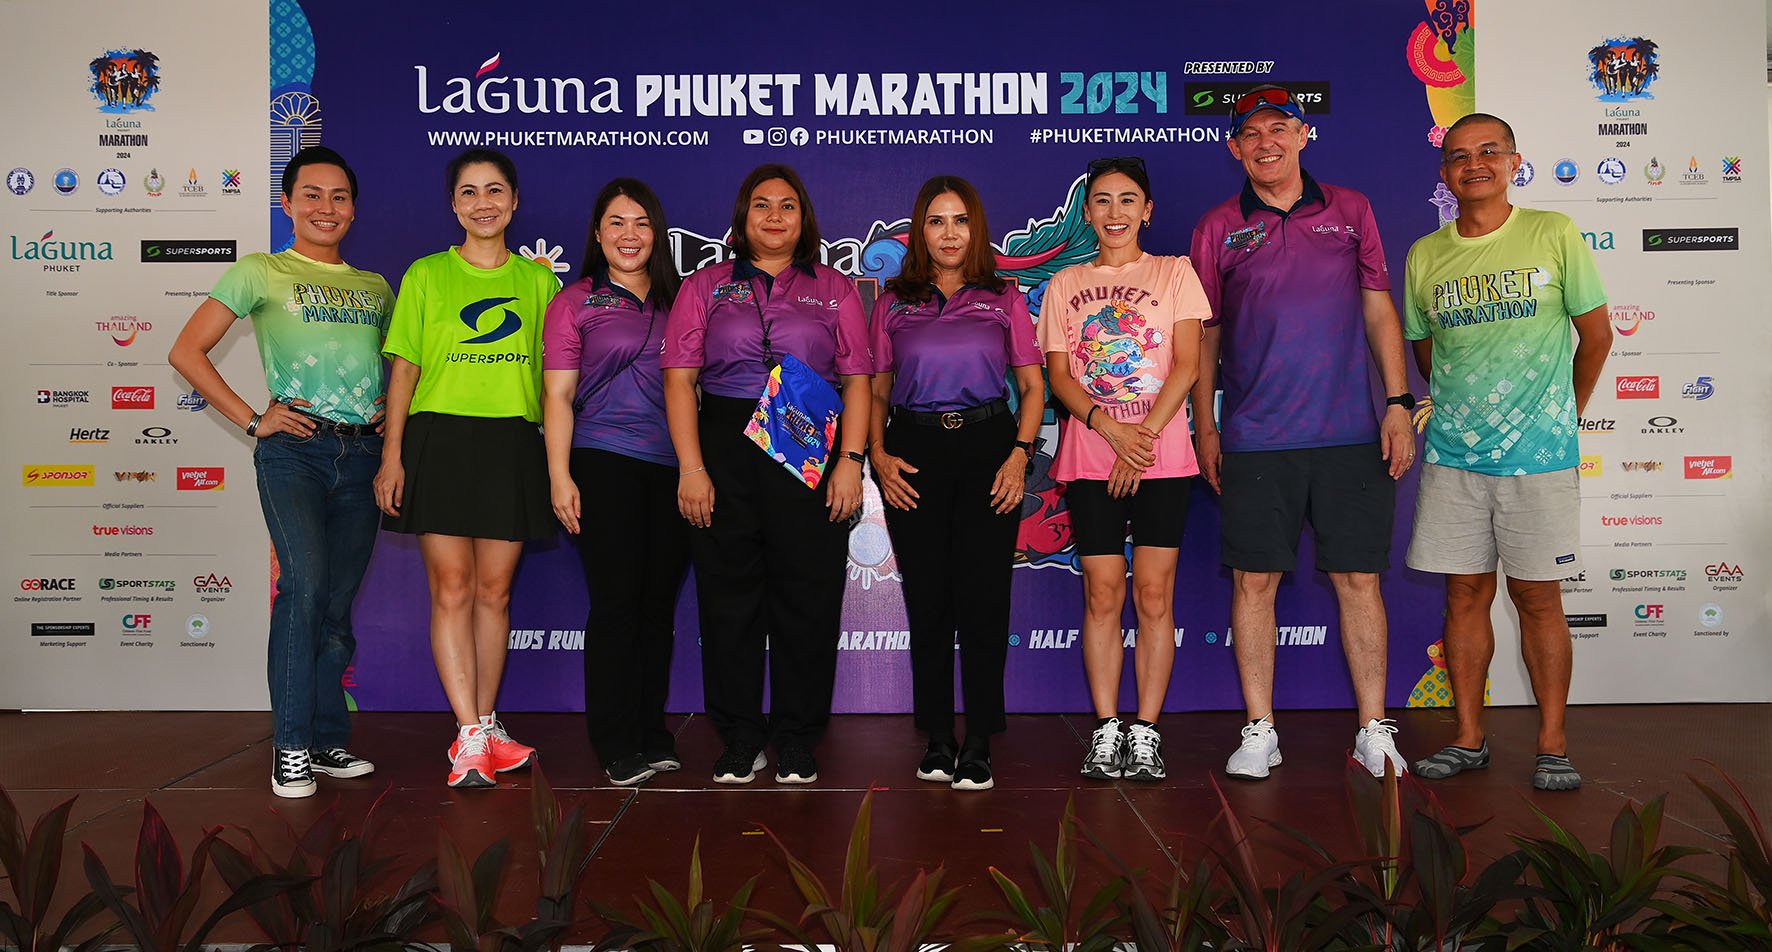 New “Fun-Sport-Lifestyle” concept for 2024 Laguna Phuket Marathon Presented by Supersports as event is set to welcome participants from 51 countries